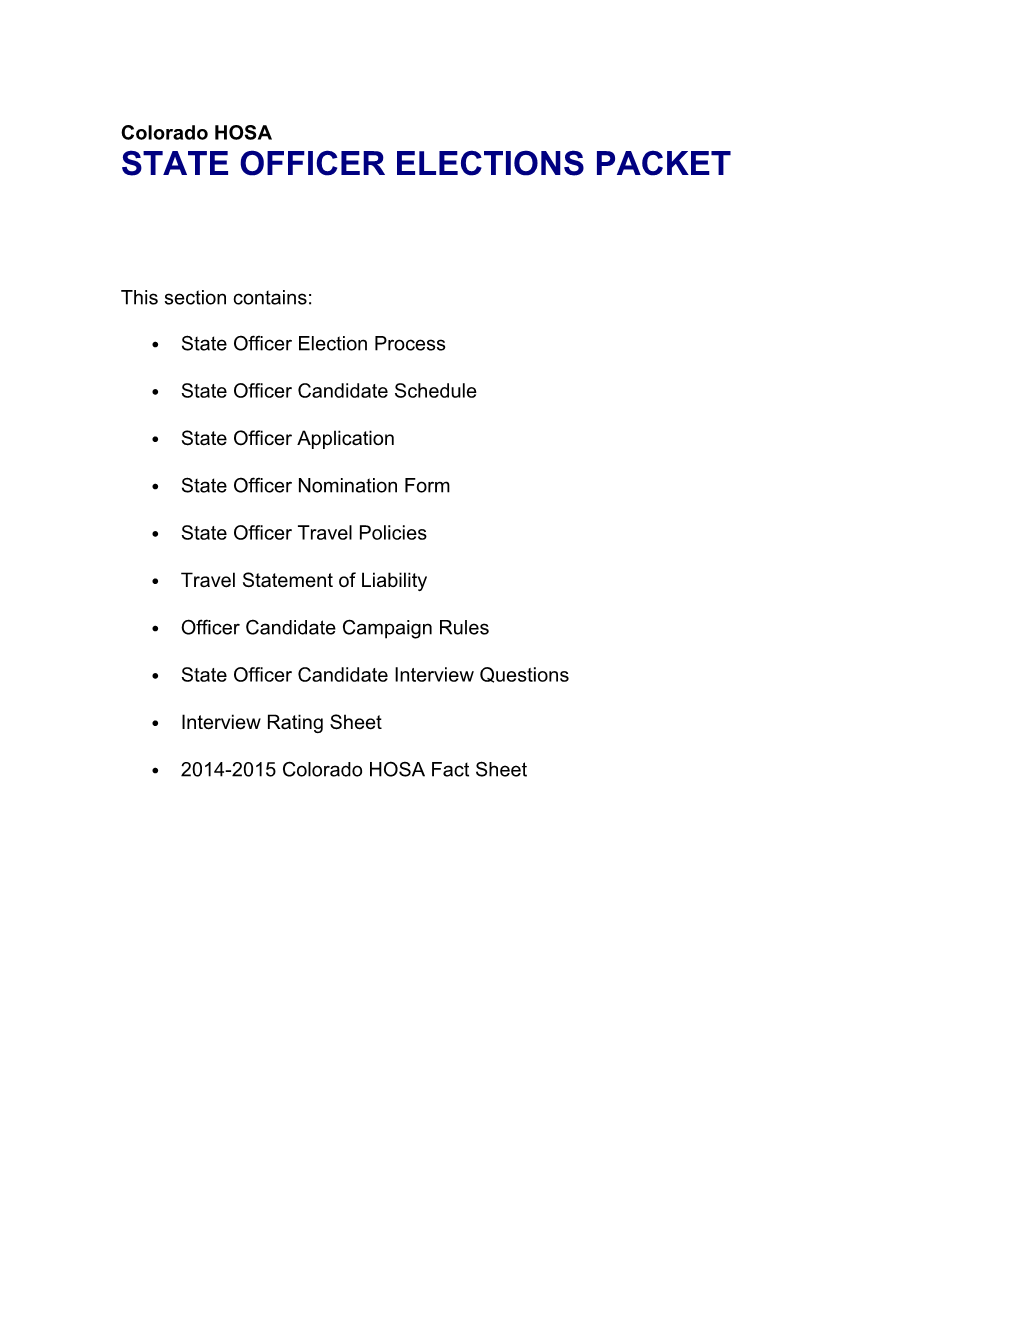 State Officer Elections Packet